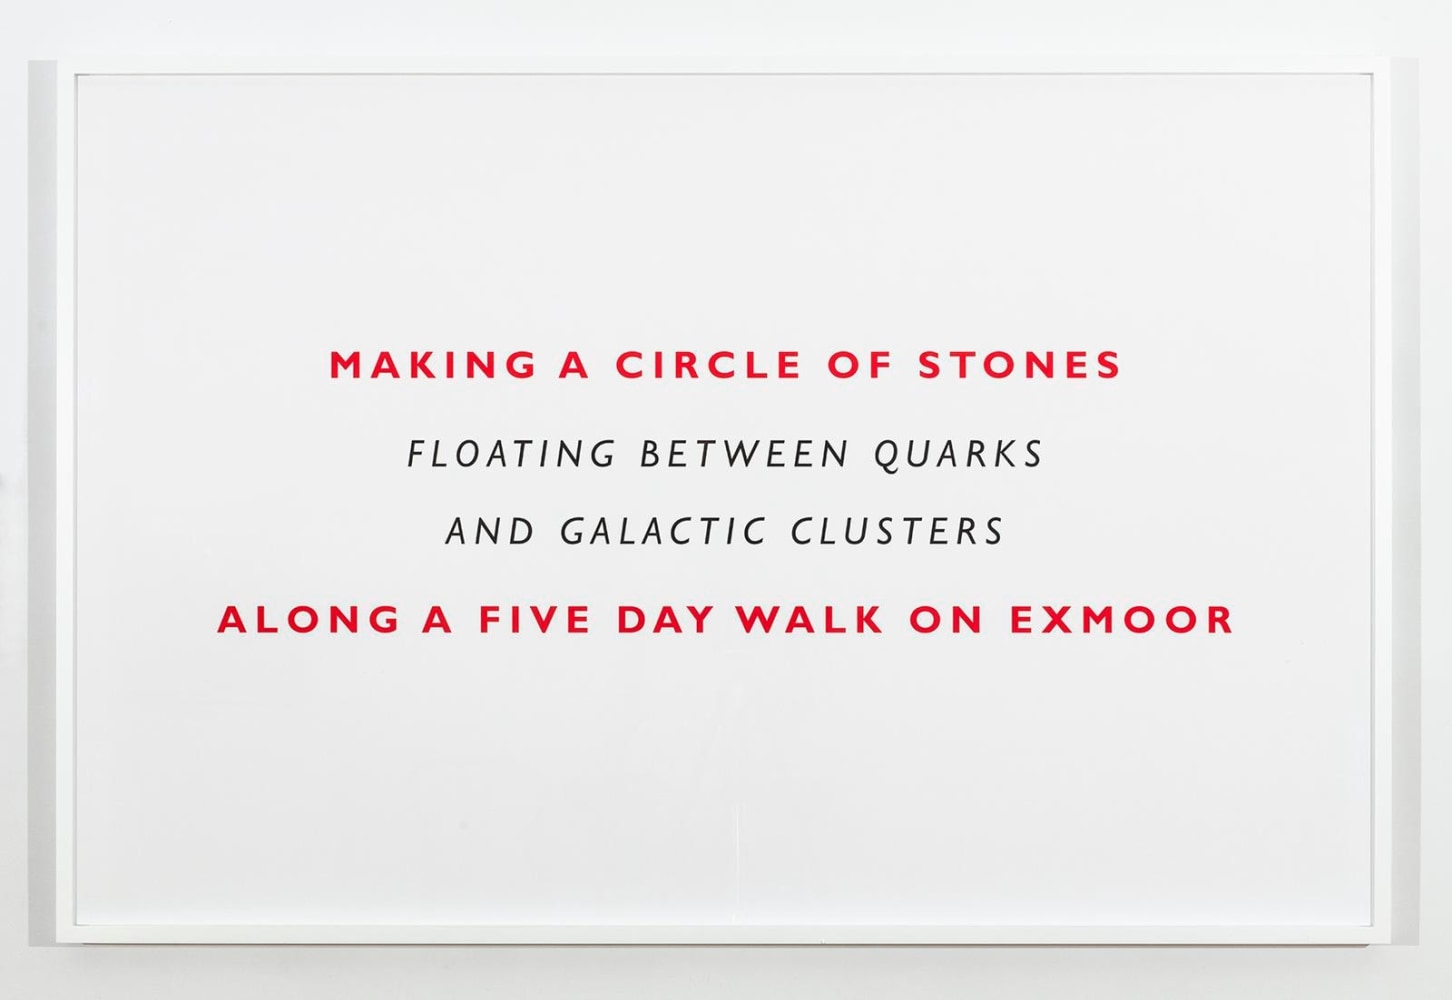 Richard&amp;nbsp;Long
Making a Circle of Stones, 2019
text
104 x 282 inches (264,2 x 716,3 cm) as installed
framed text: 41 3/4 x 63 1/8 inches (106 x 160,3 cm)